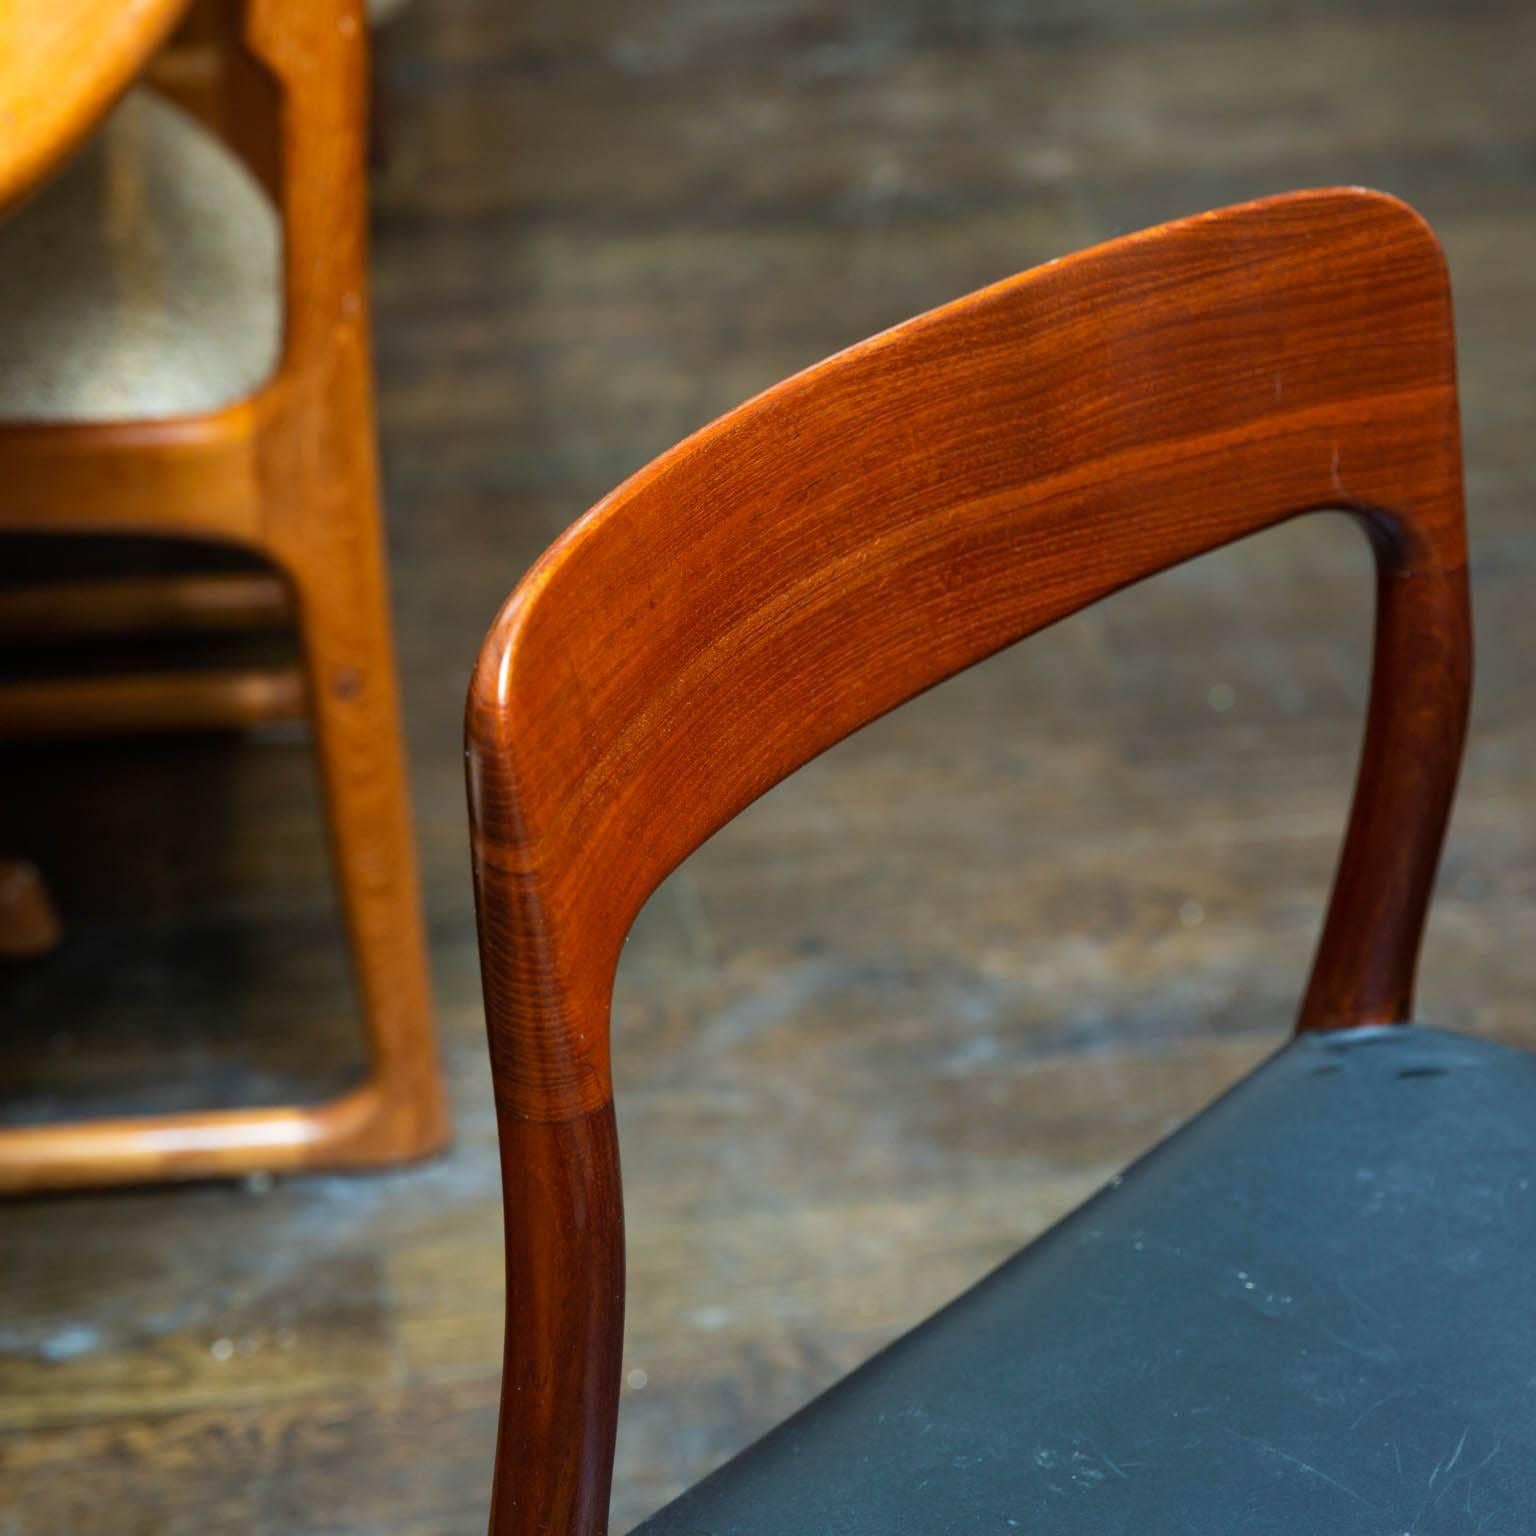 Newly recovered in black naugahyde, this is a rare set of solid teak chairs that has been together in one family since the sixties.